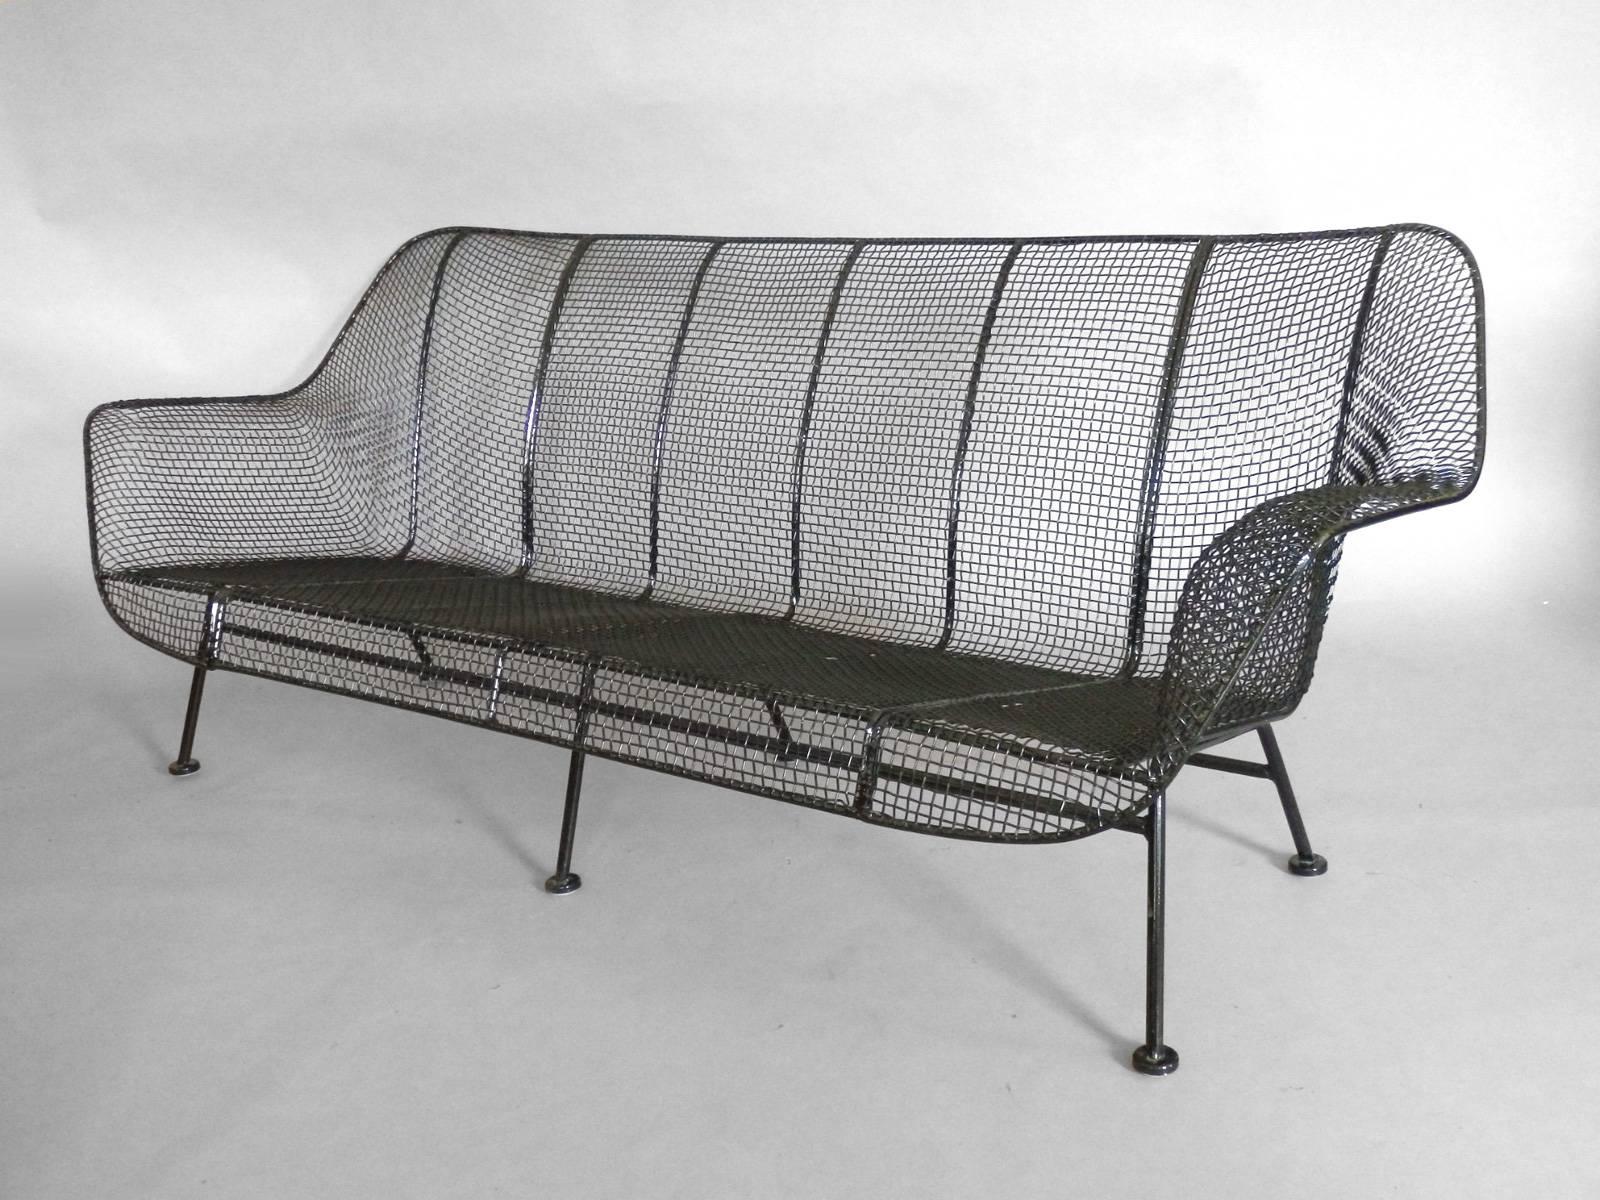 Wrought iron couch by Russell Lee Woodard for Woodard. Freshly powder coated in gloss black with new glides added.